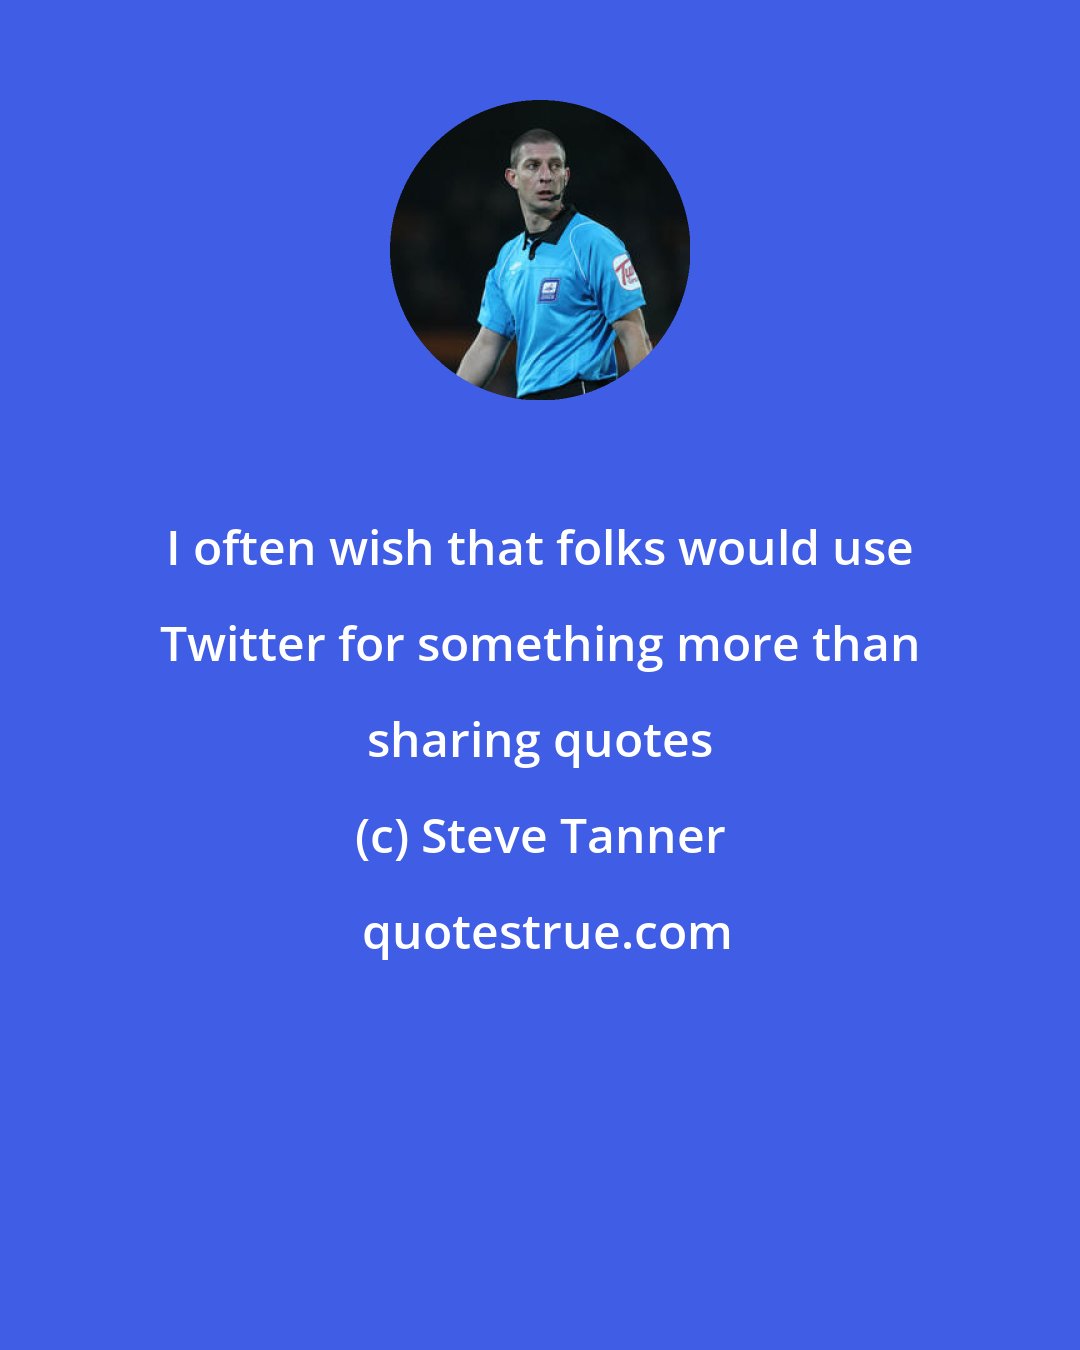 Steve Tanner: I often wish that folks would use Twitter for something more than sharing quotes